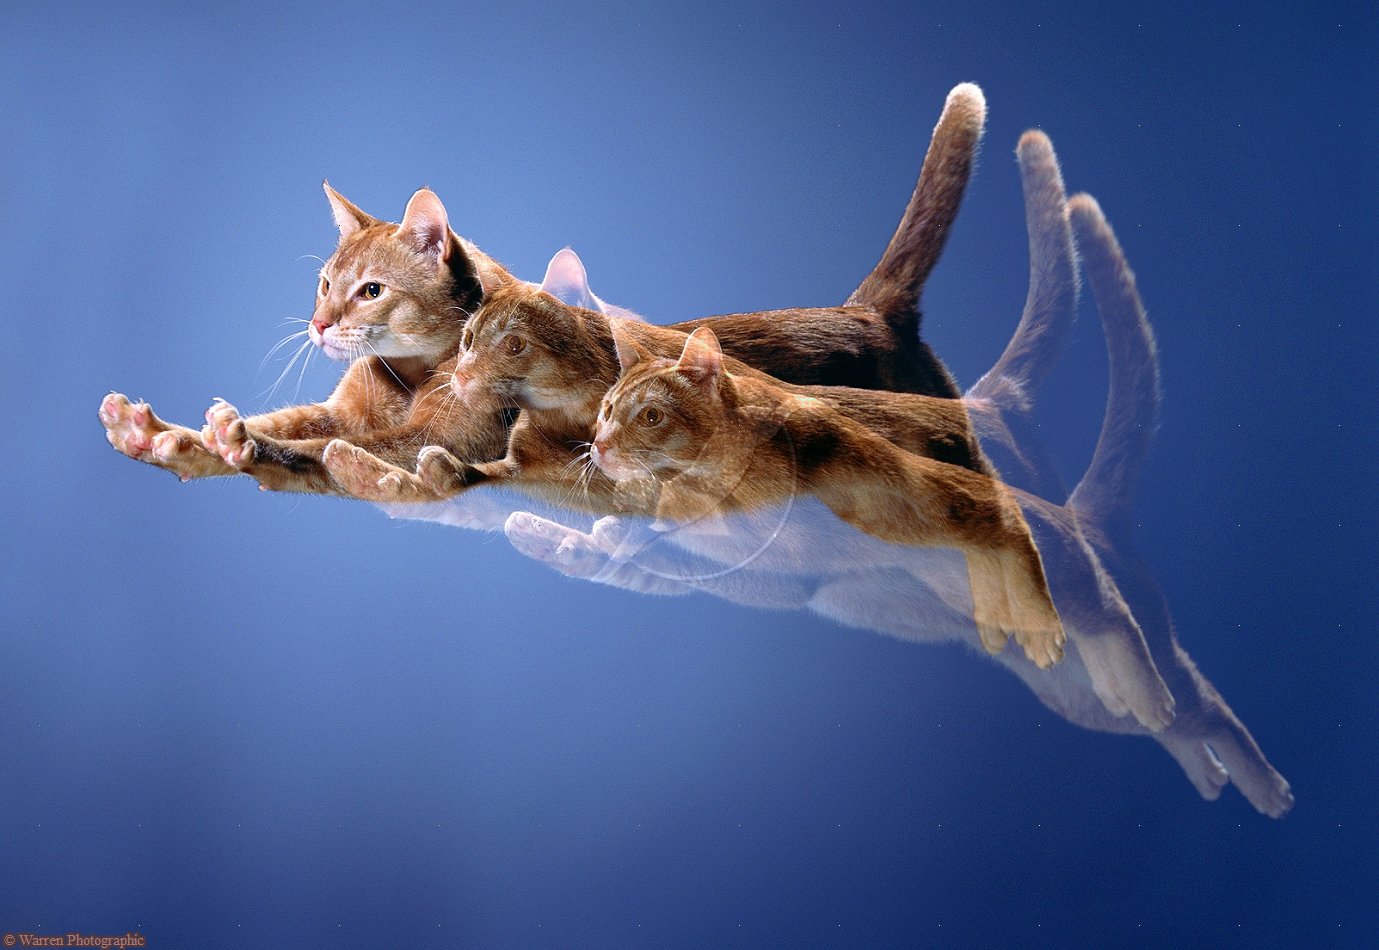 00392-ginger-cat-leaping-multiple-exposure